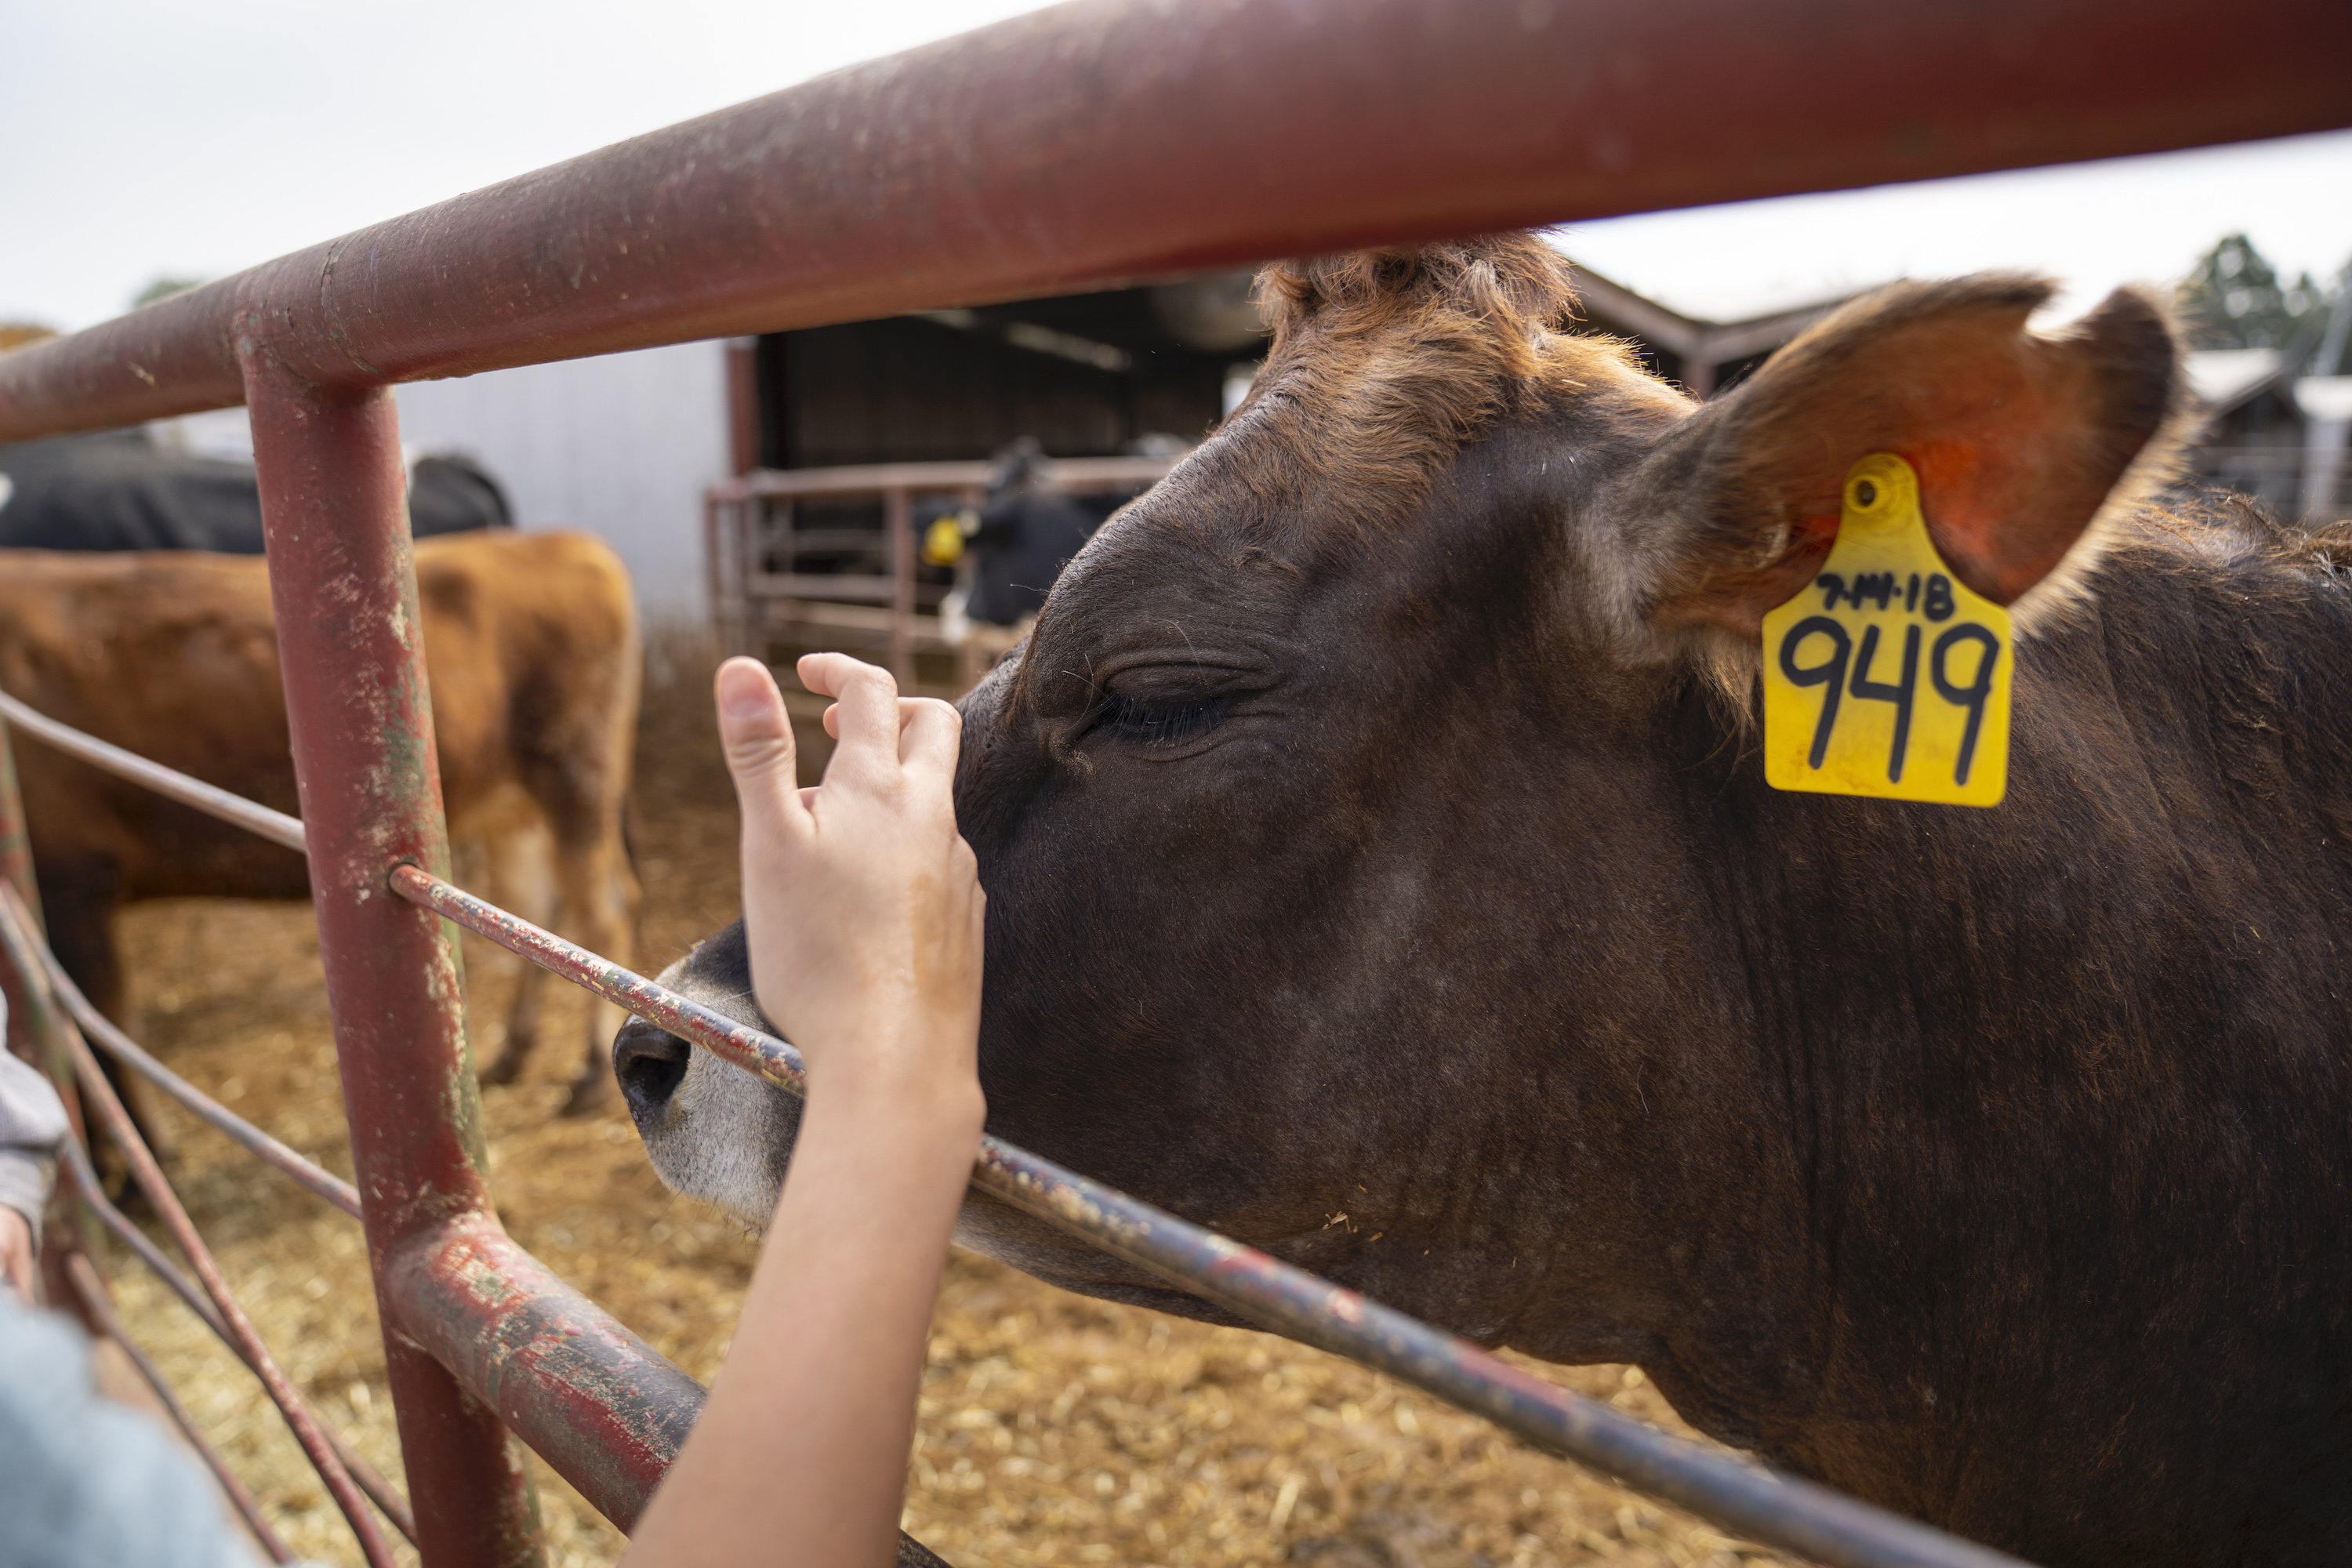 hand petting brown cow behind wire fence